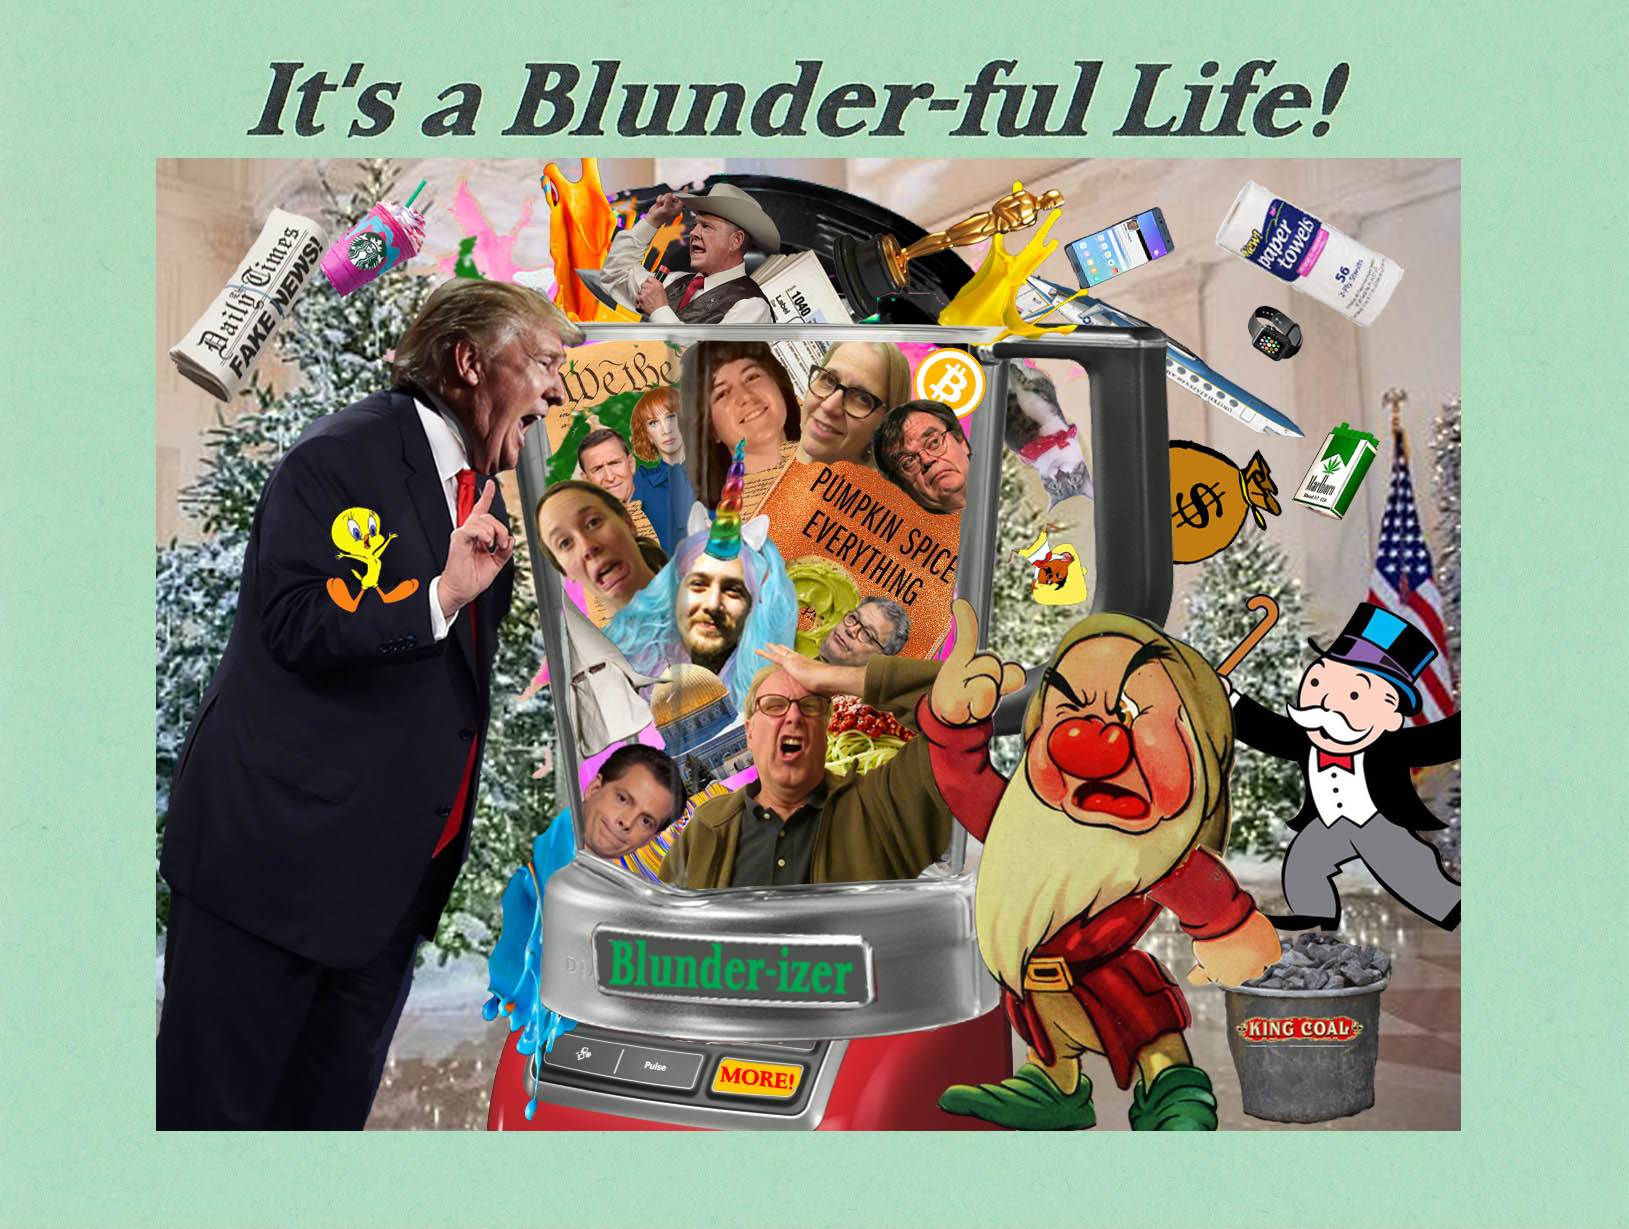 2017 - It's a Blunder-ful Life!